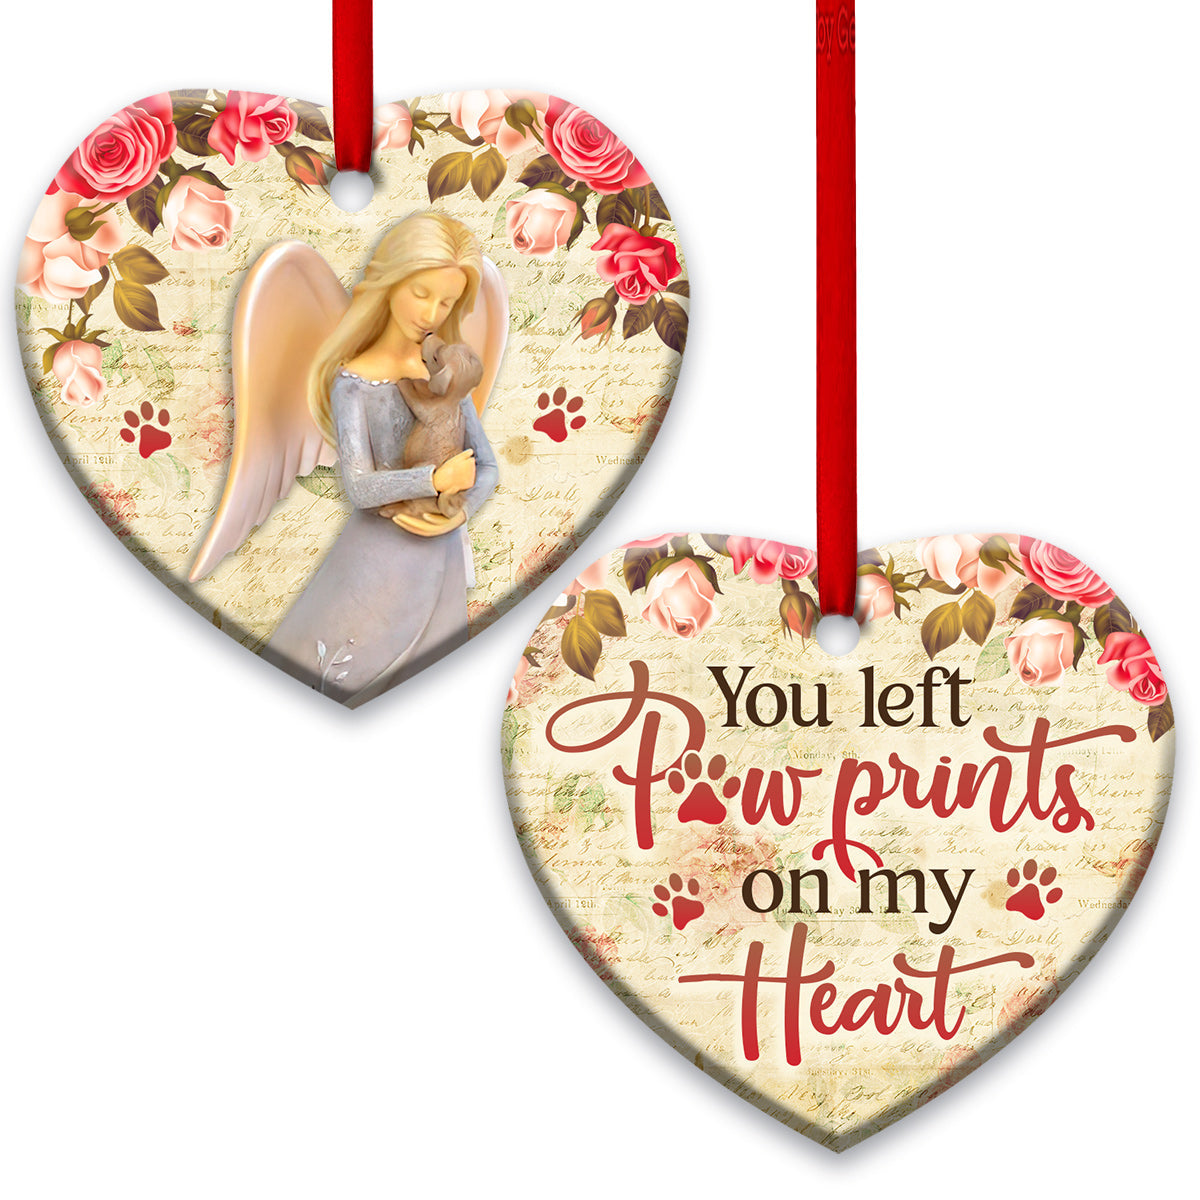 Pet Memorial Angel You Left Paw Prints On My Heart Heart Ceramic Ornament - Christmas Ornament - Christmas Gift